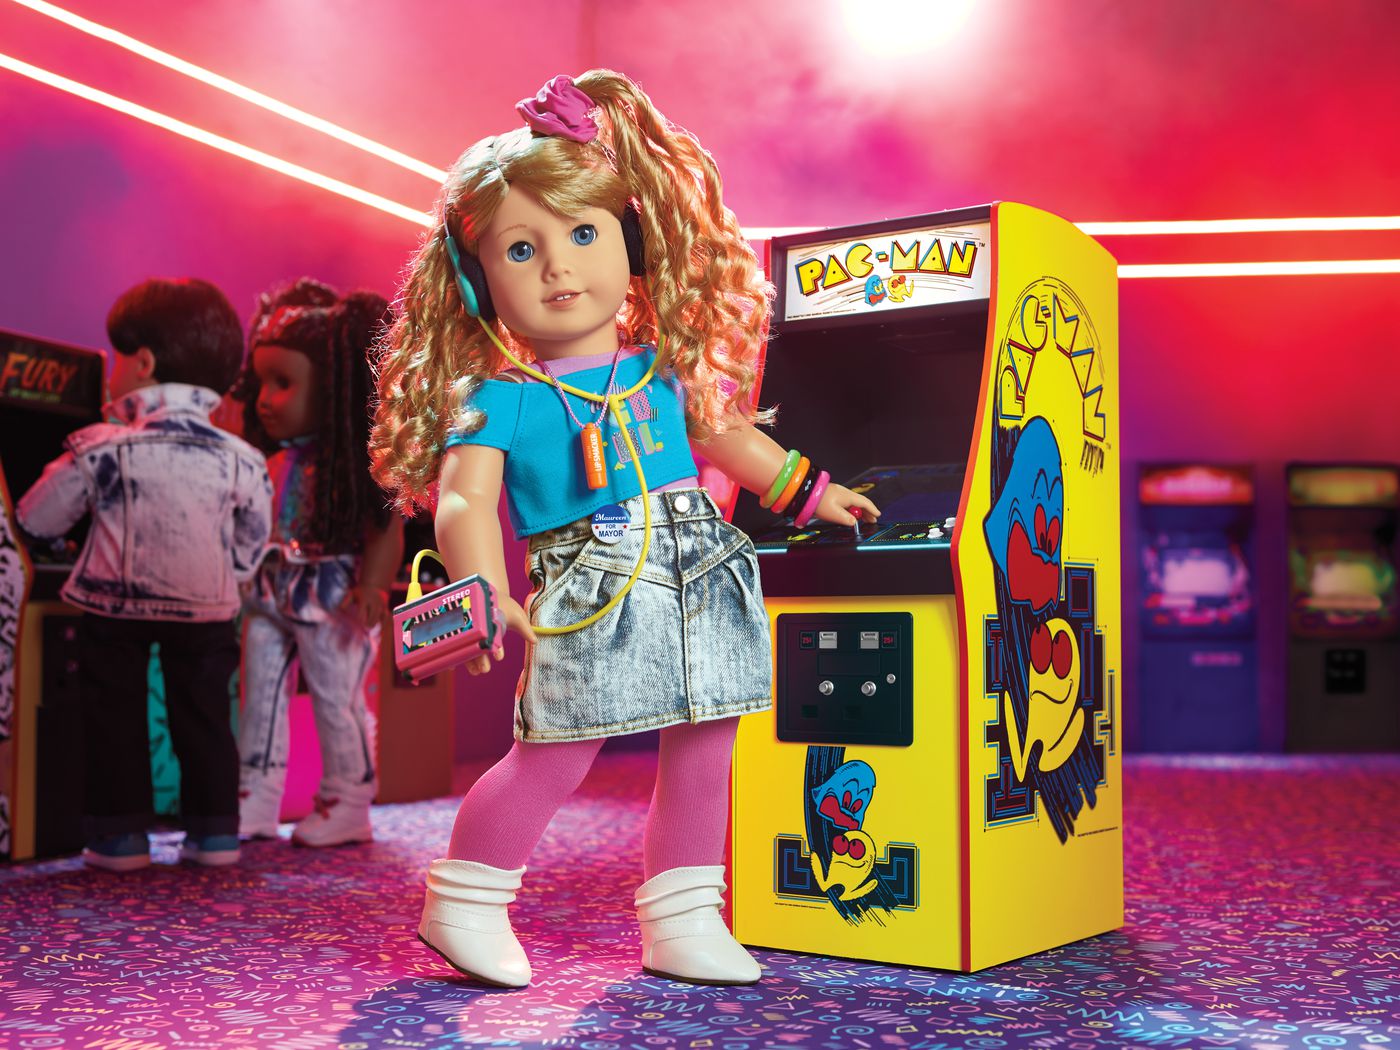 cindy rothlisberger recommends american american girl doll videos pic